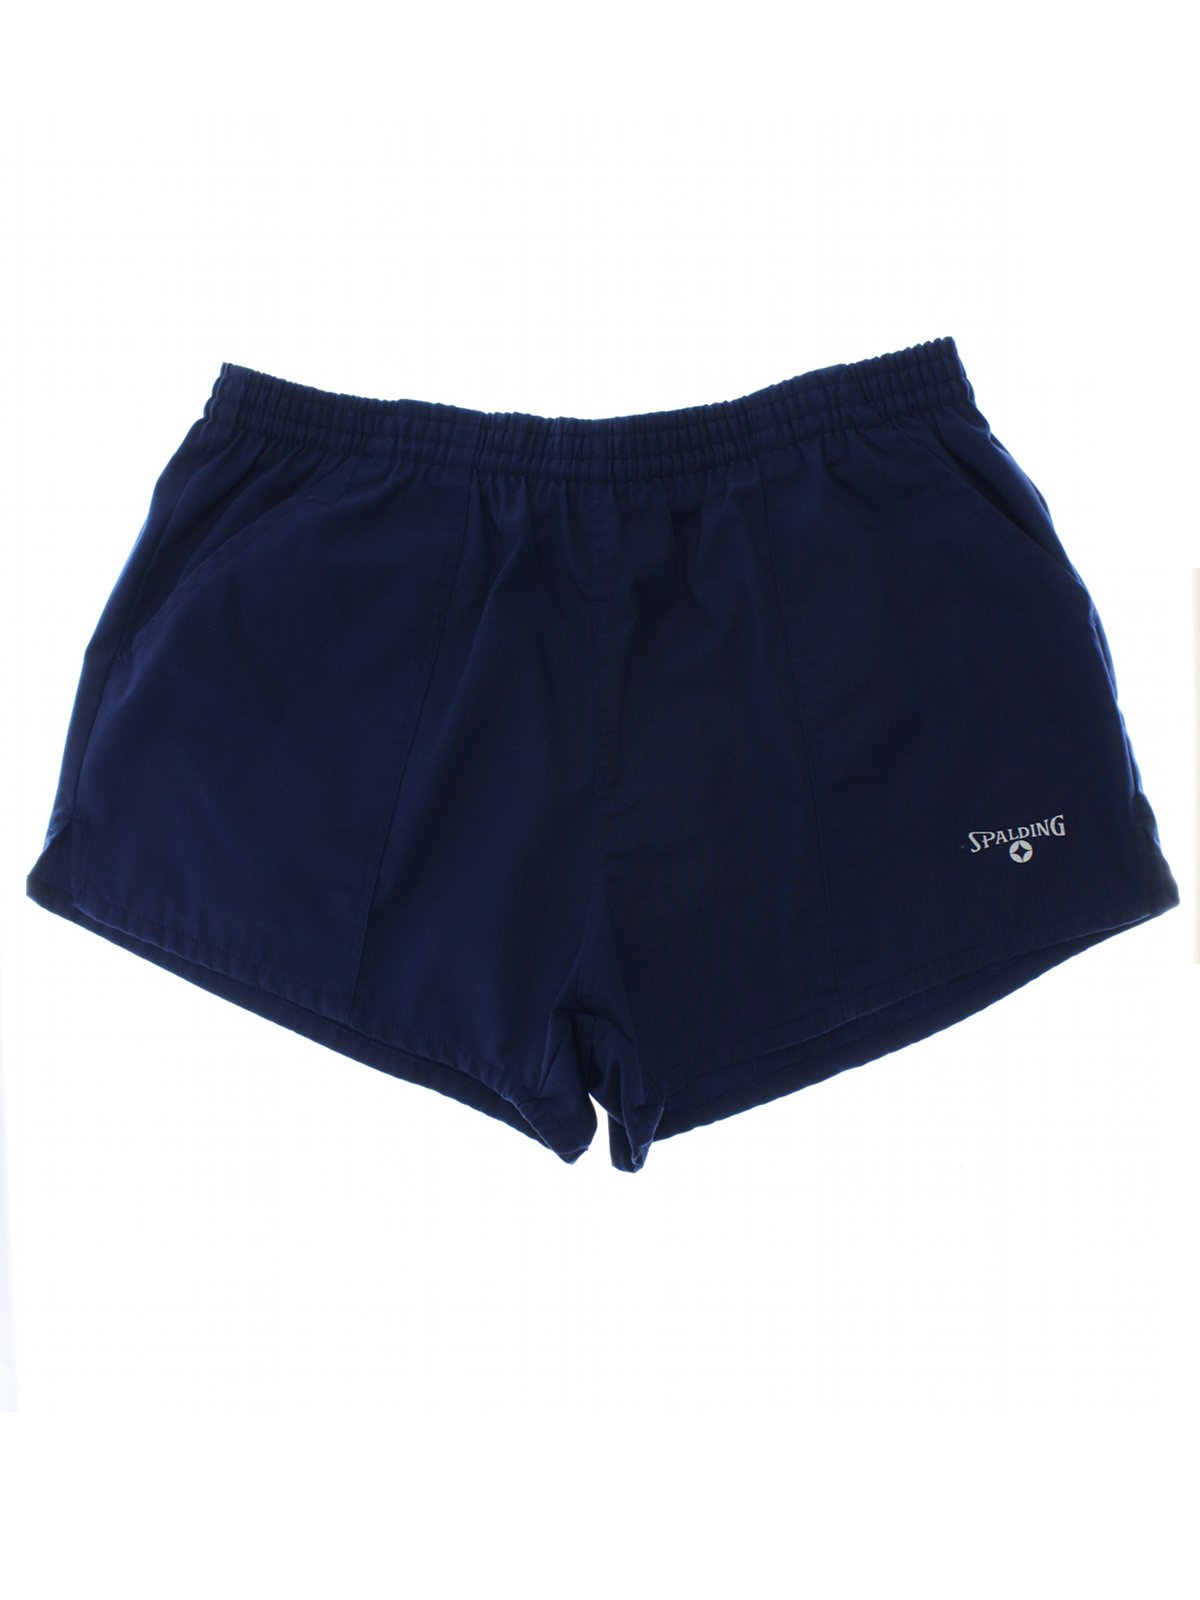 Vintage 80s Shorts: 80s -Spalding- Mens blue background polyester and ...